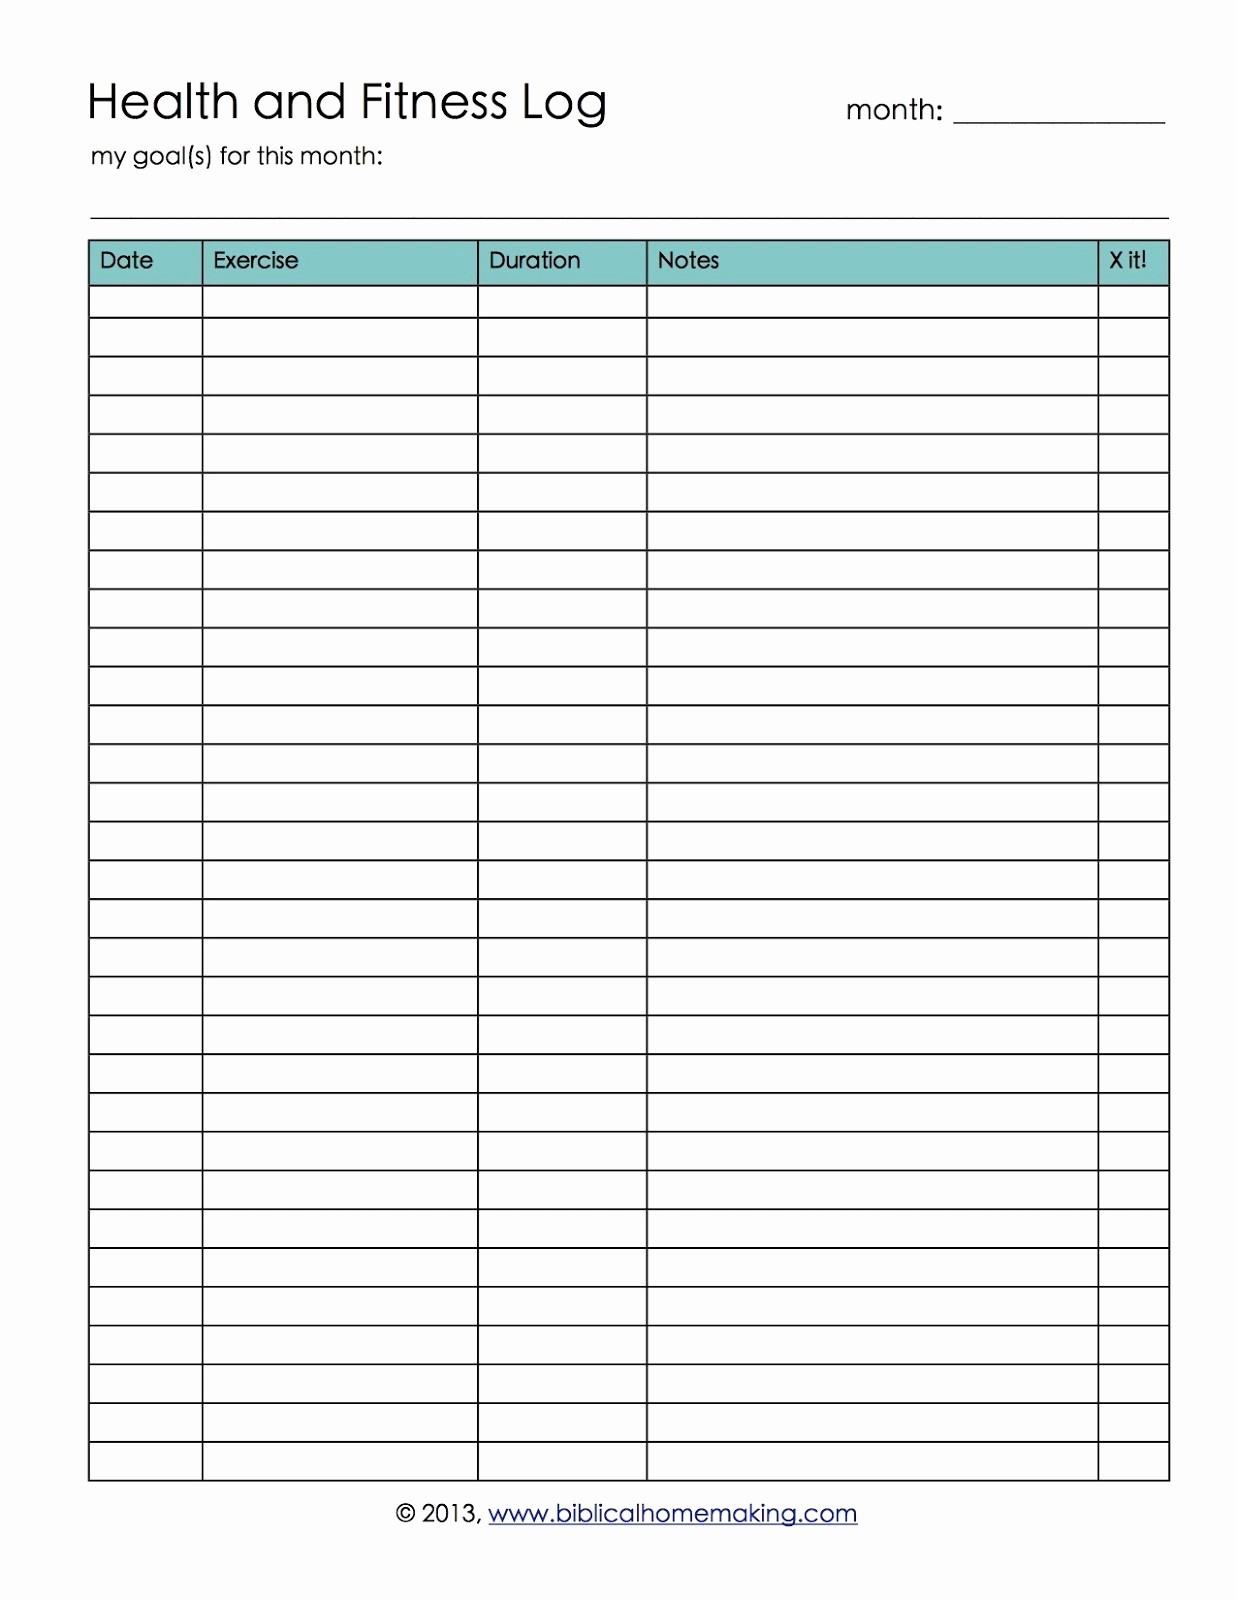 Biggest Loser Weight Loss Calculator Spreadsheet New Fice Document